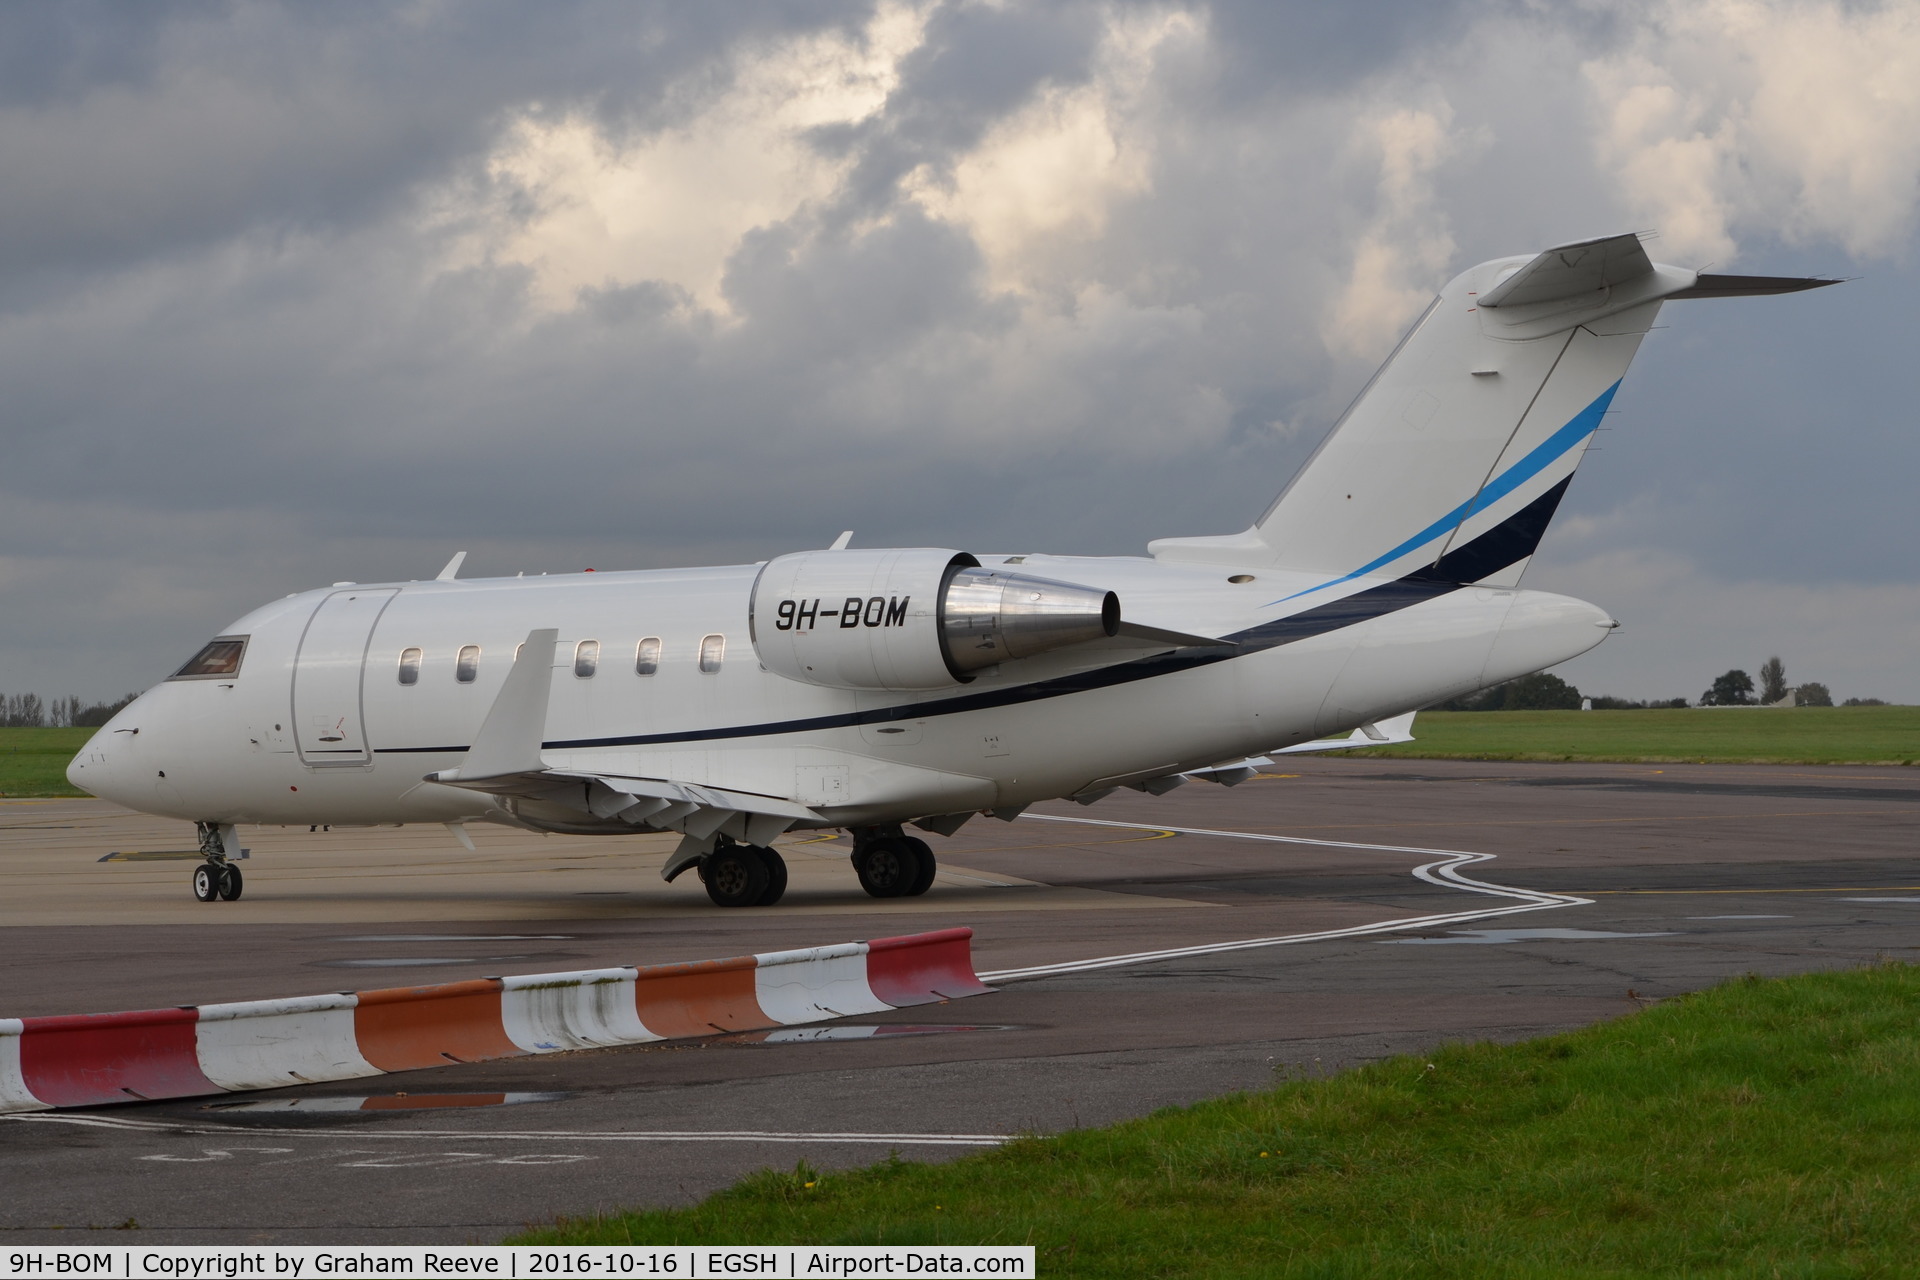 9H-BOM, 2009 Bombardier Challenger 605 (CL-600-2B16) C/N 5785, Just landed at Norwich.